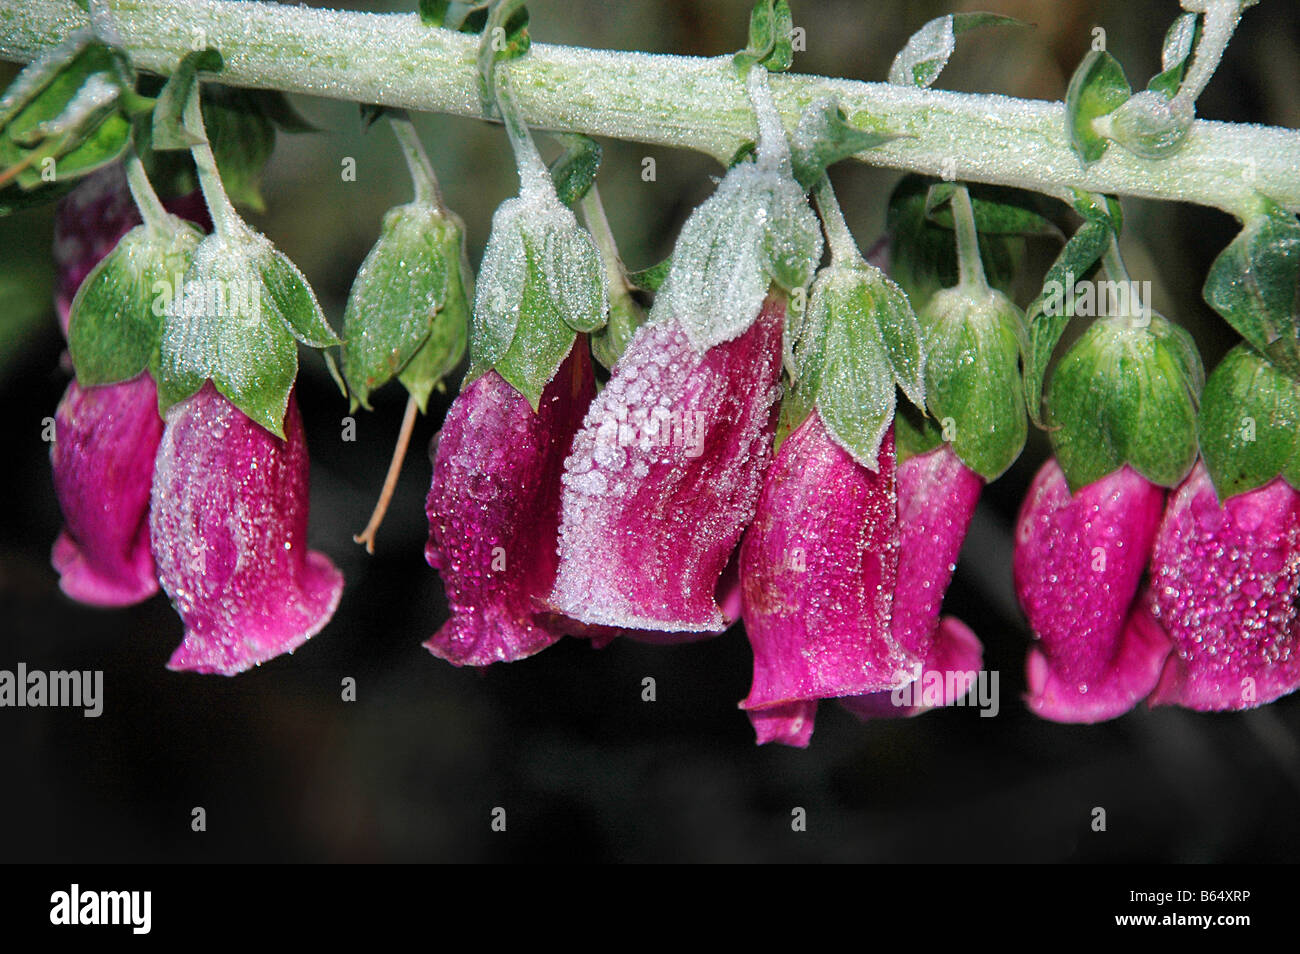 A stalk of frosted foxglove flowers. Stock Photo